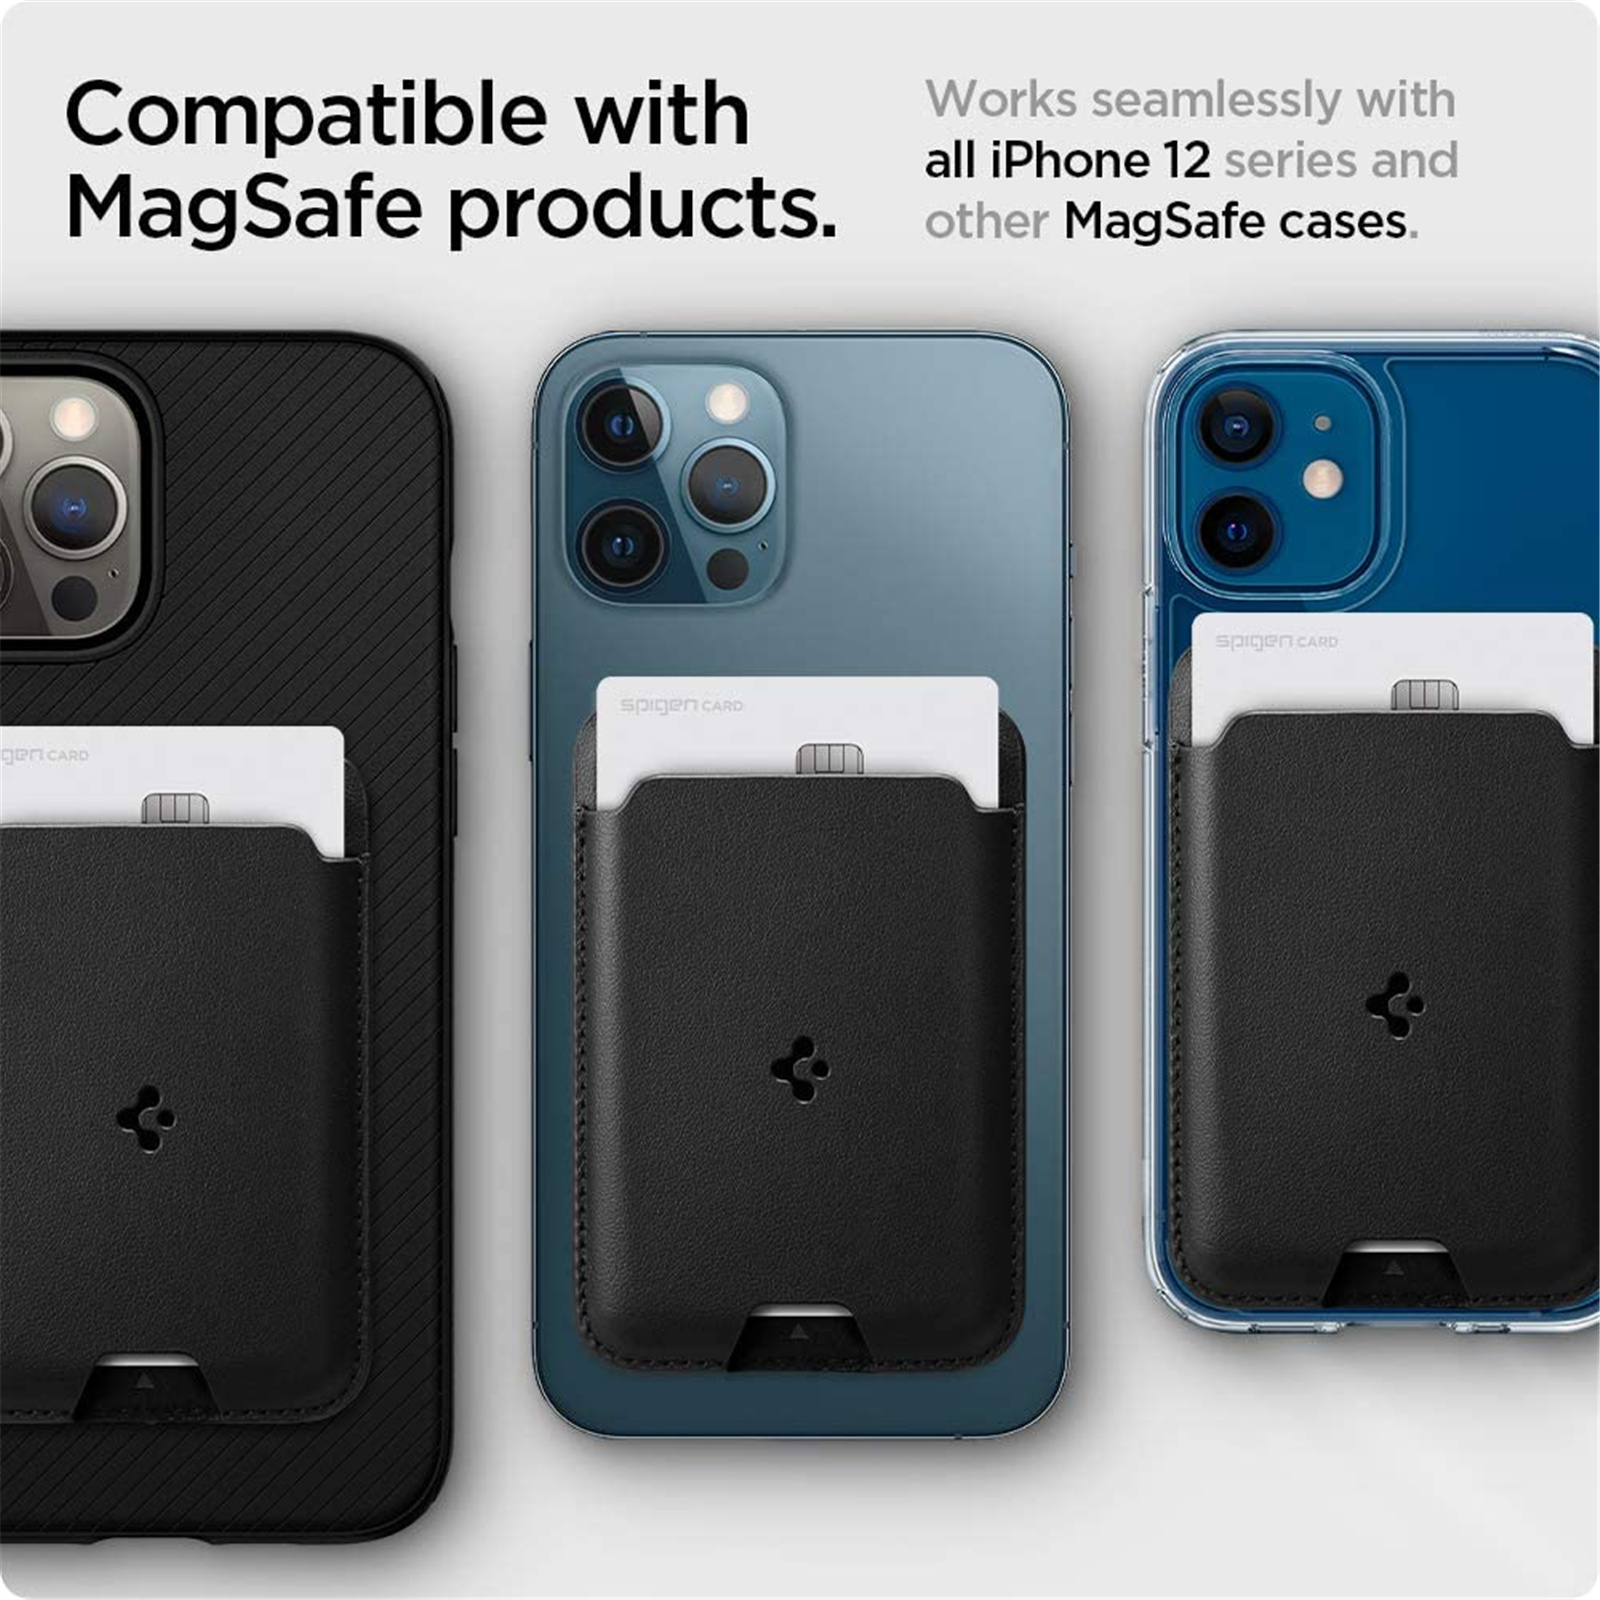 Been looking for a bumper case similar to the iPhone 4 bumper from Apple  and came across RhinoShield. This is the RhinoShield Crash Guard NX Bumper  ft. my Pacific Blue 12 Pro 